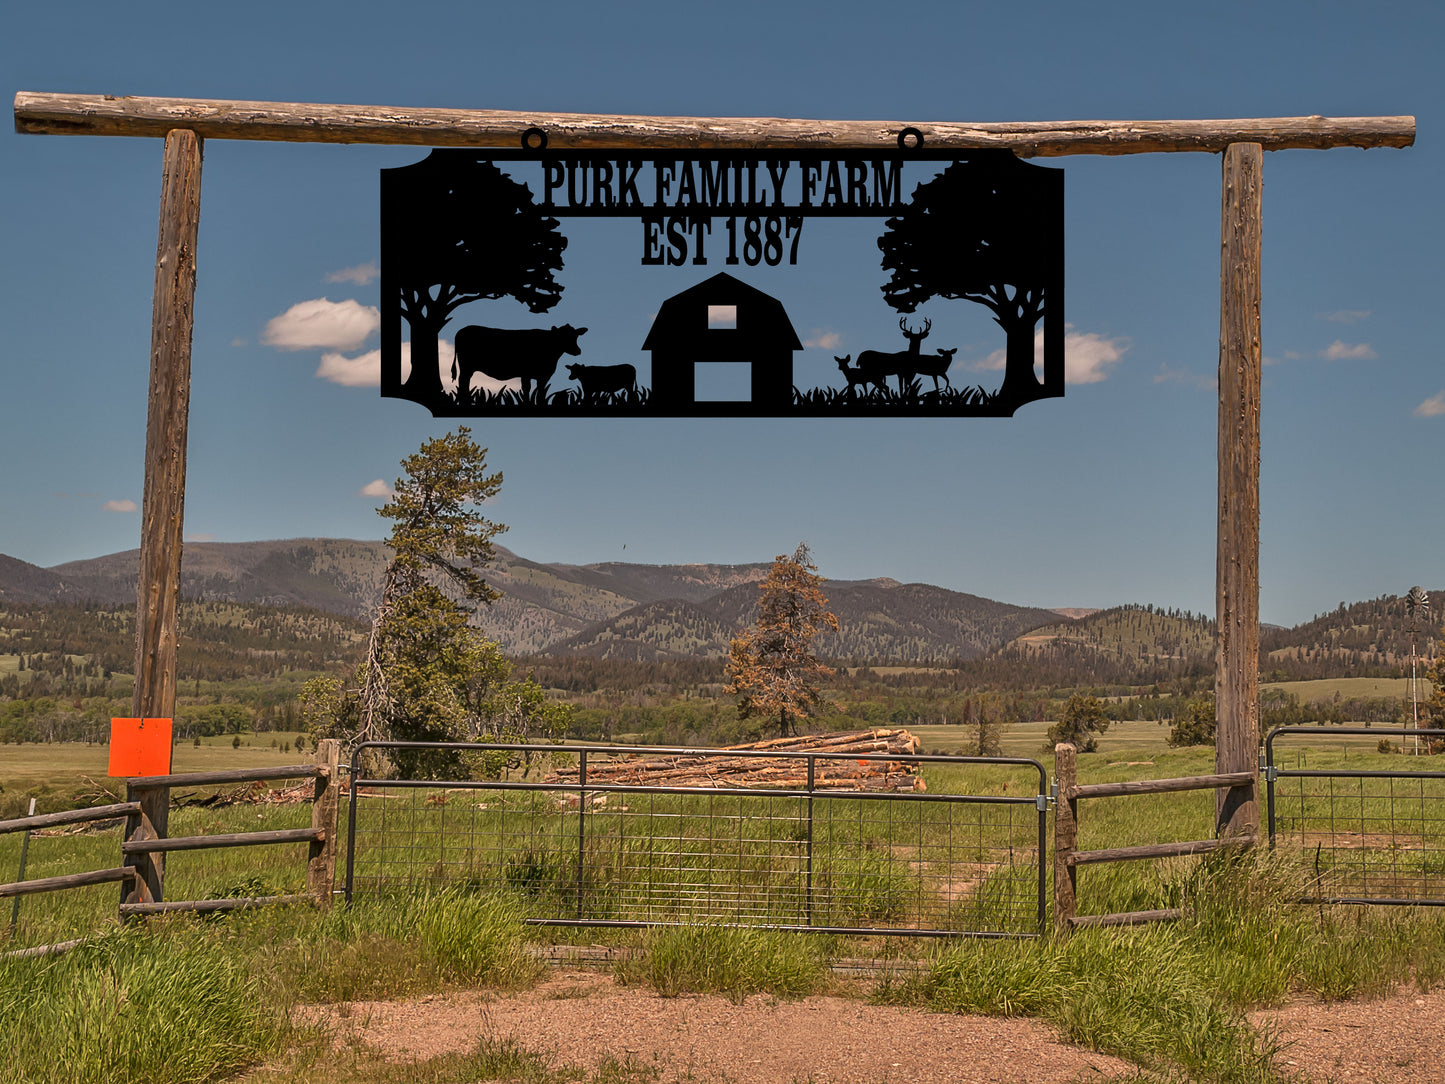 Farm Sign with a Barn, Cows, and Deer